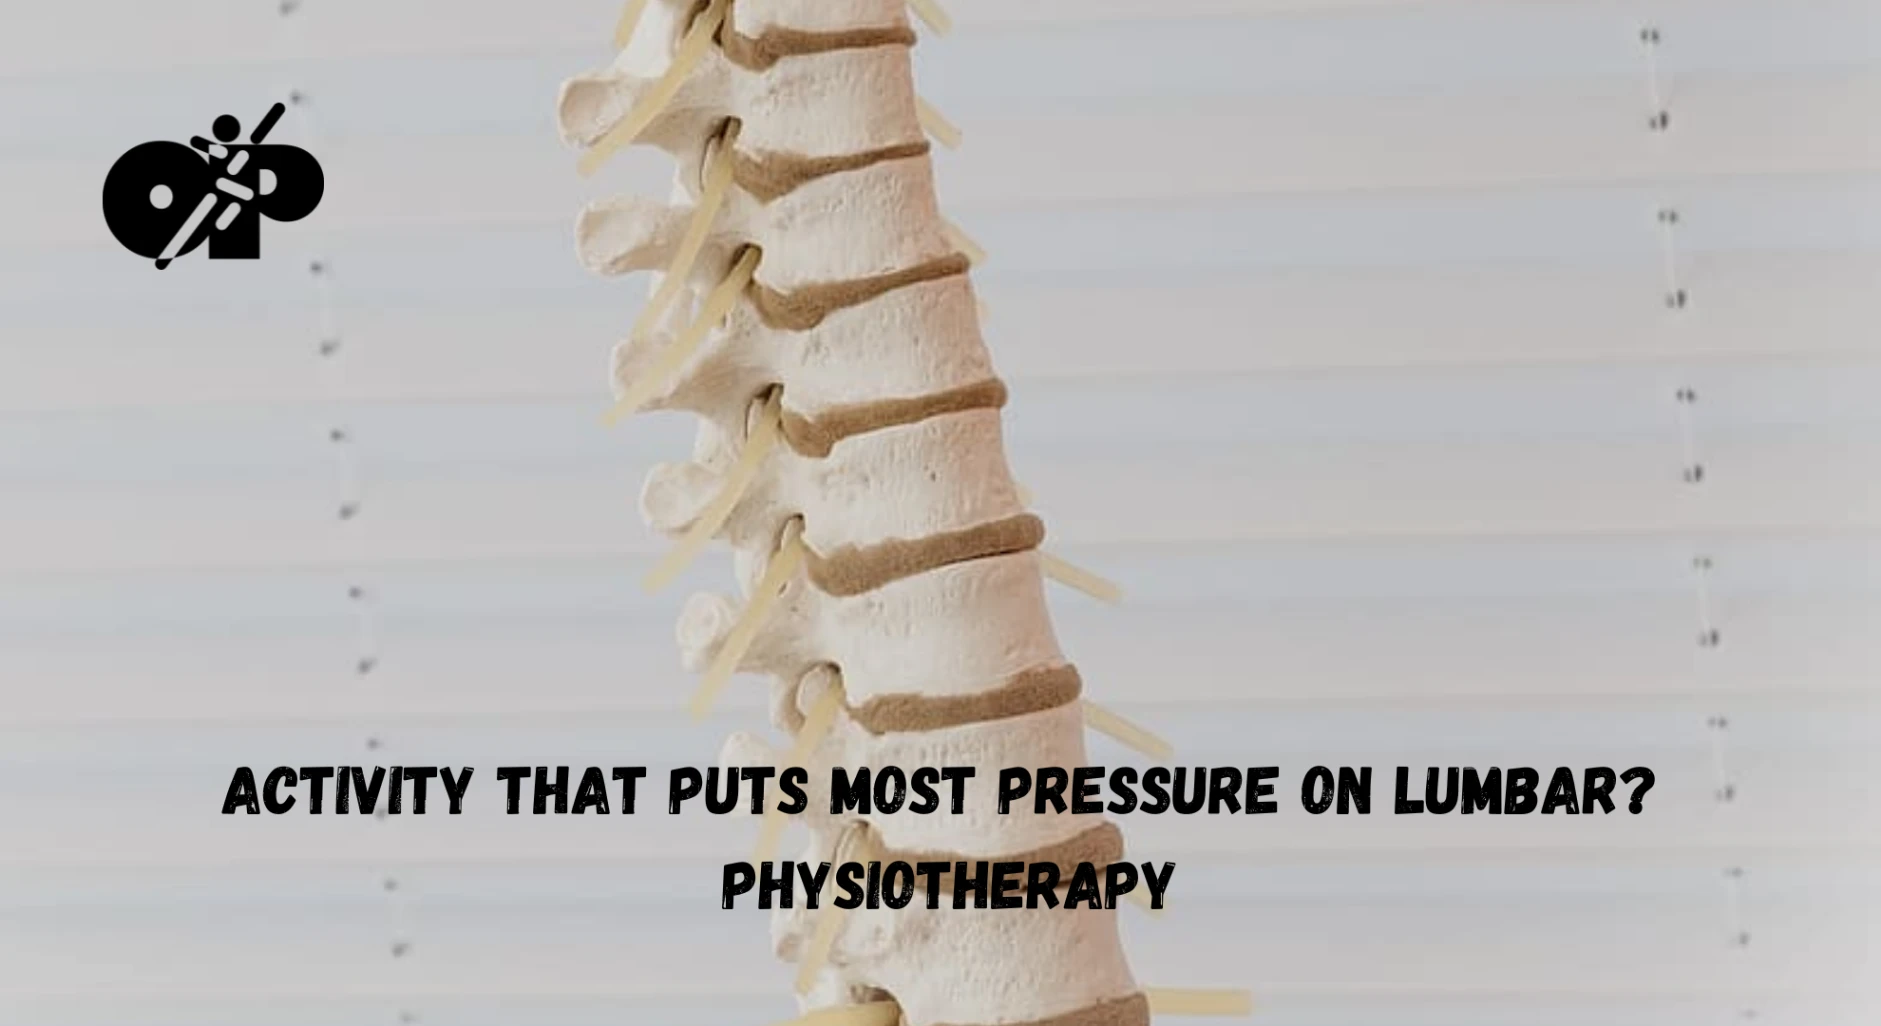 30. Activity that Puts Most Pressure on Lumbar – Physiotherapy